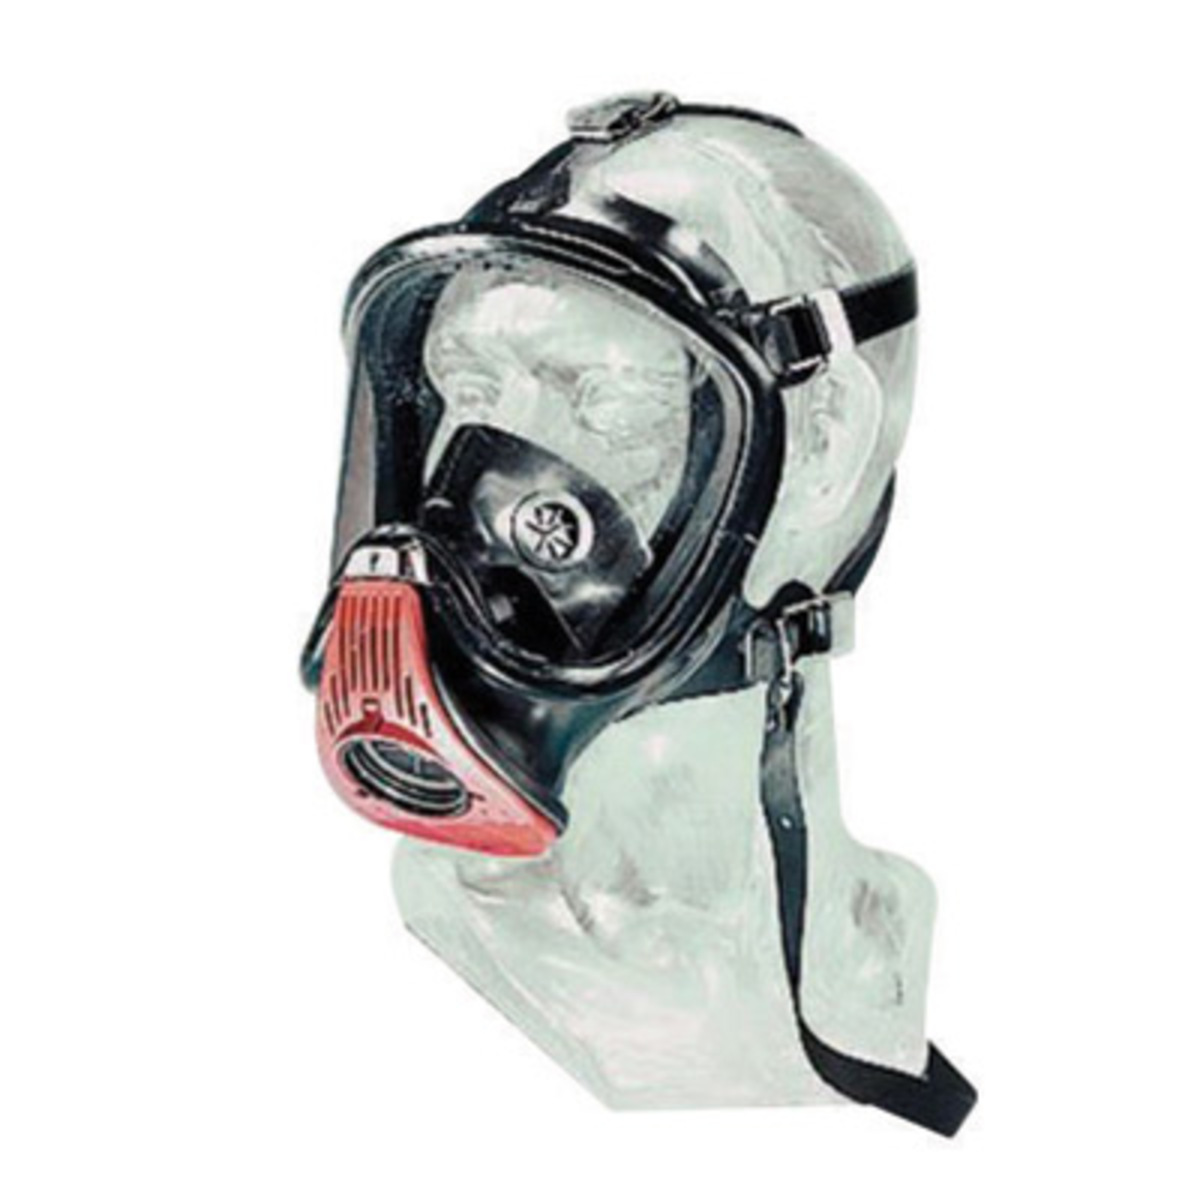 MSA Large UltraVue Elite™ Series Full Face Air Purifying Respirator (Availability restrictions apply.)